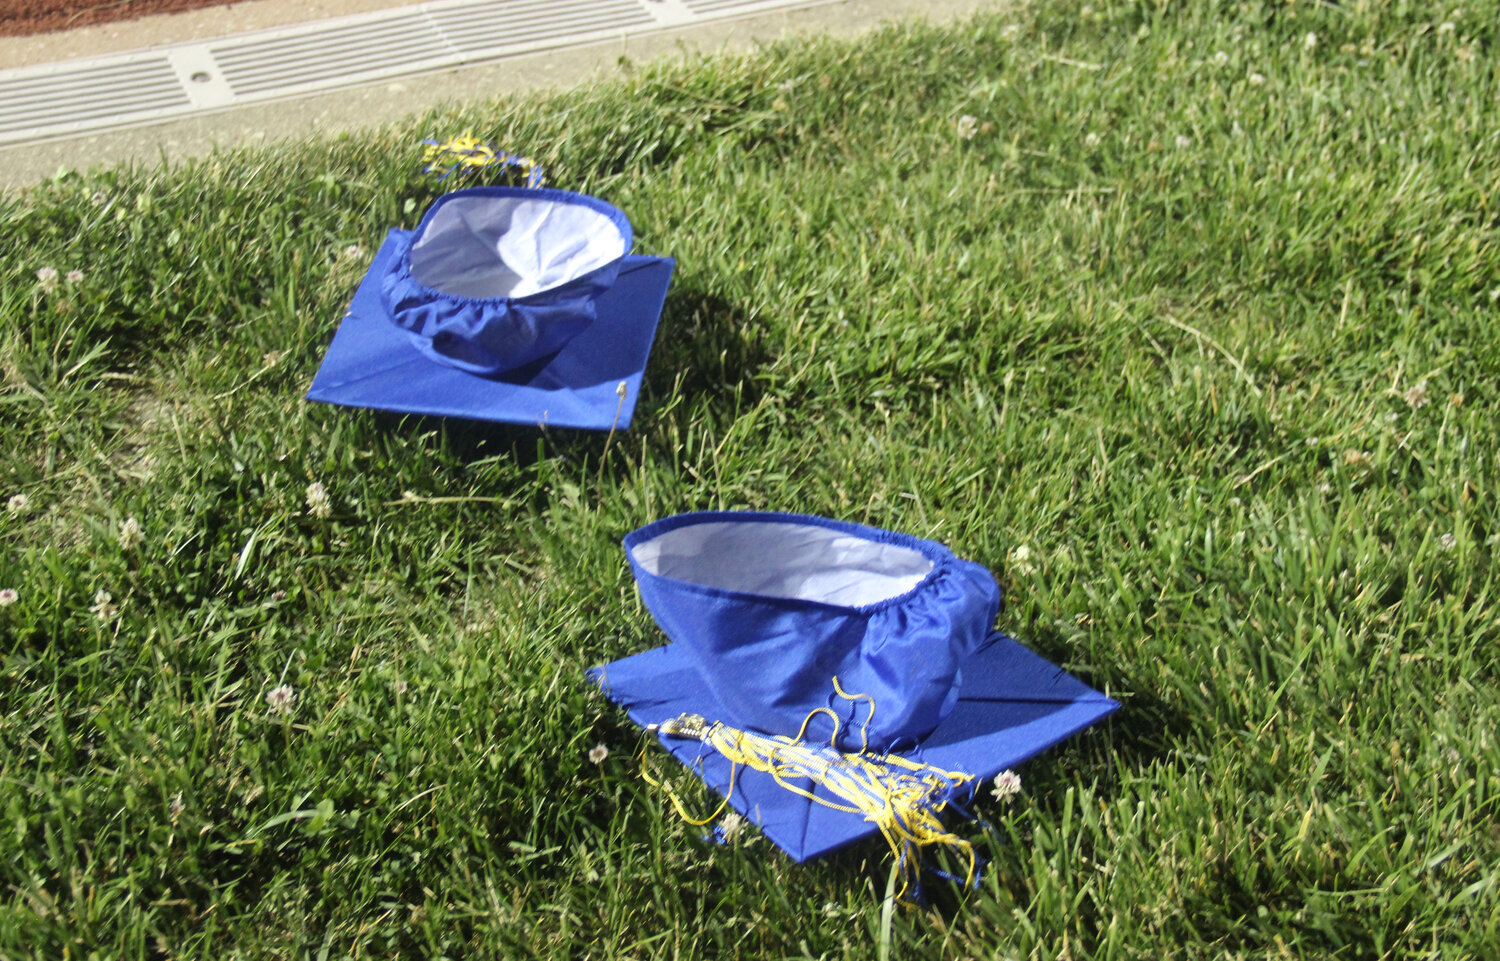 Two of the many caps that went airborne during the graduation ceremony landed on the football field waiting for their owners to retrieve them at the end of the graduation ceremony.